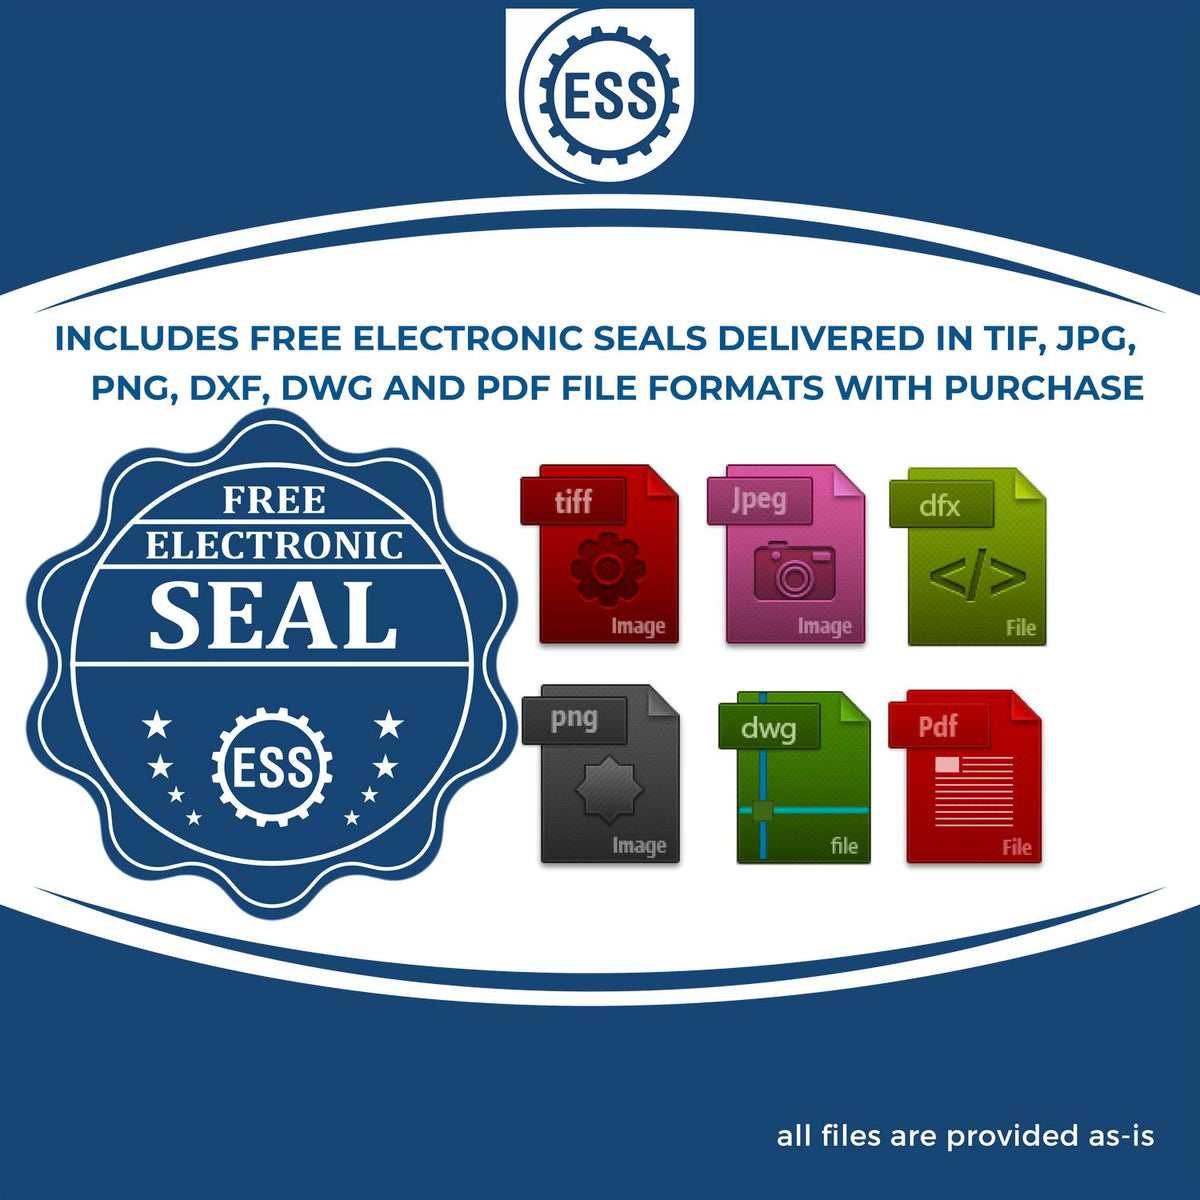 An infographic for the free electronic seal for the Heavy Duty Cast Iron Wisconsin Geologist Seal Embosser illustrating the different file type icons such as DXF, DWG, TIF, JPG and PNG.